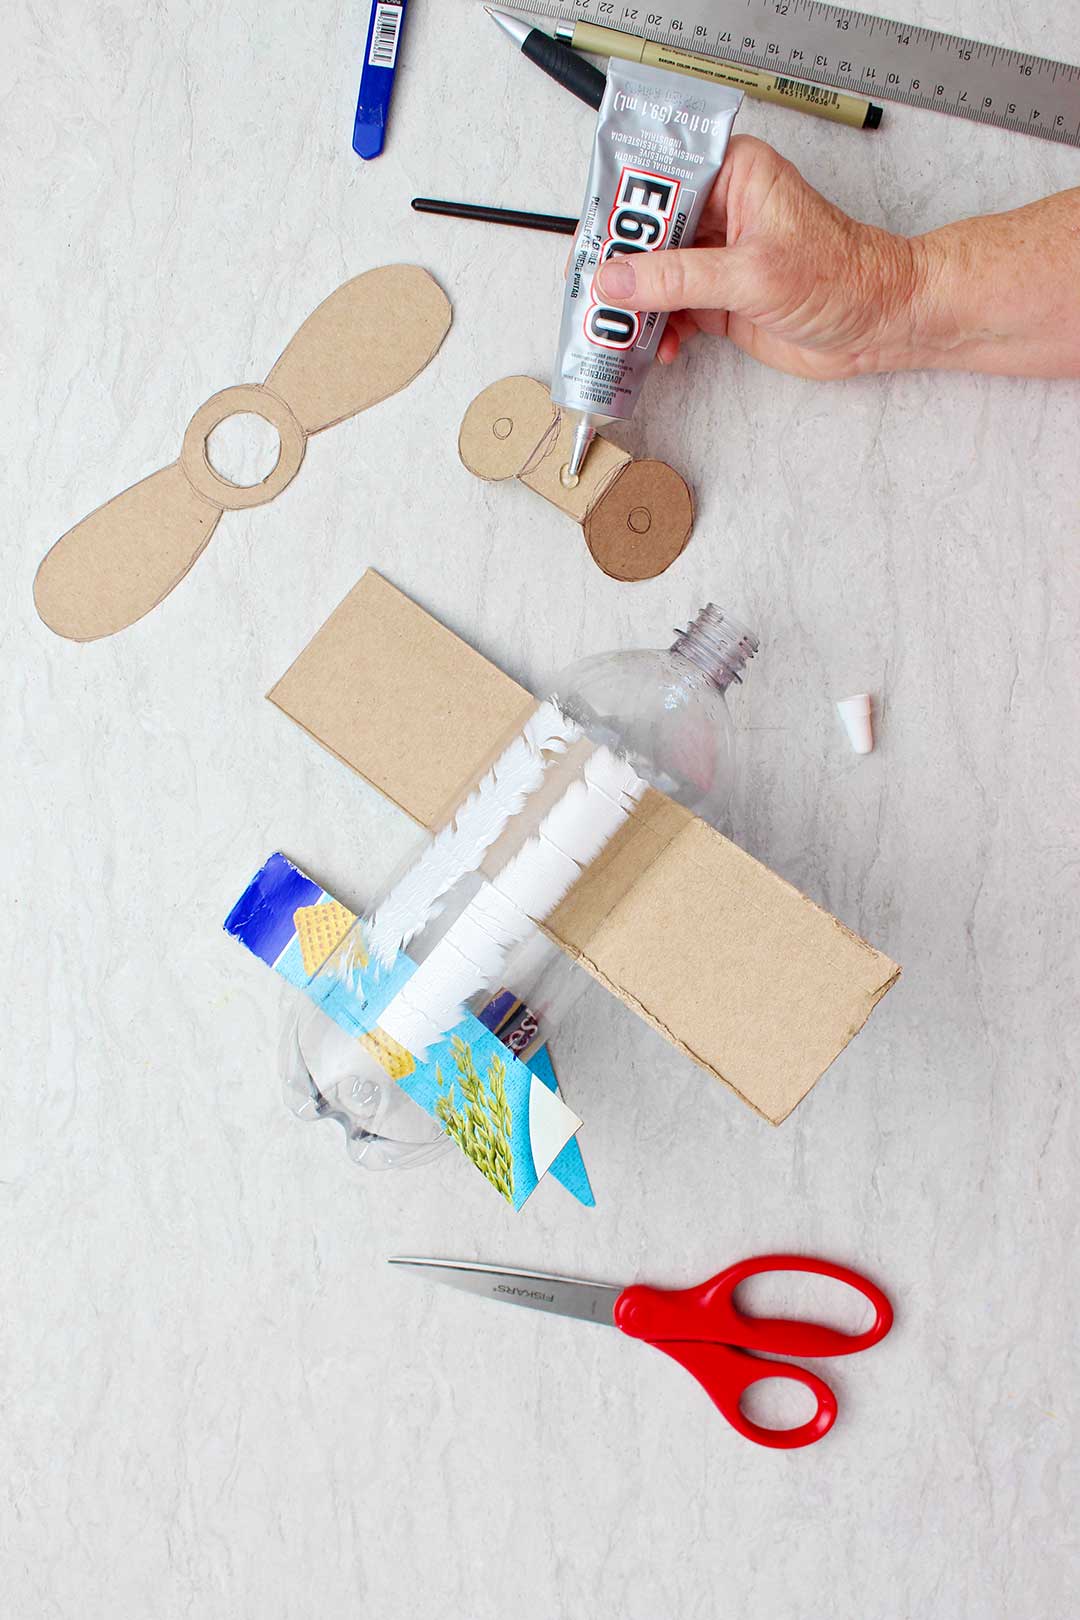 Hand gluing pieces of cardboard cut to resemble wheels for the bottom of the bottle.